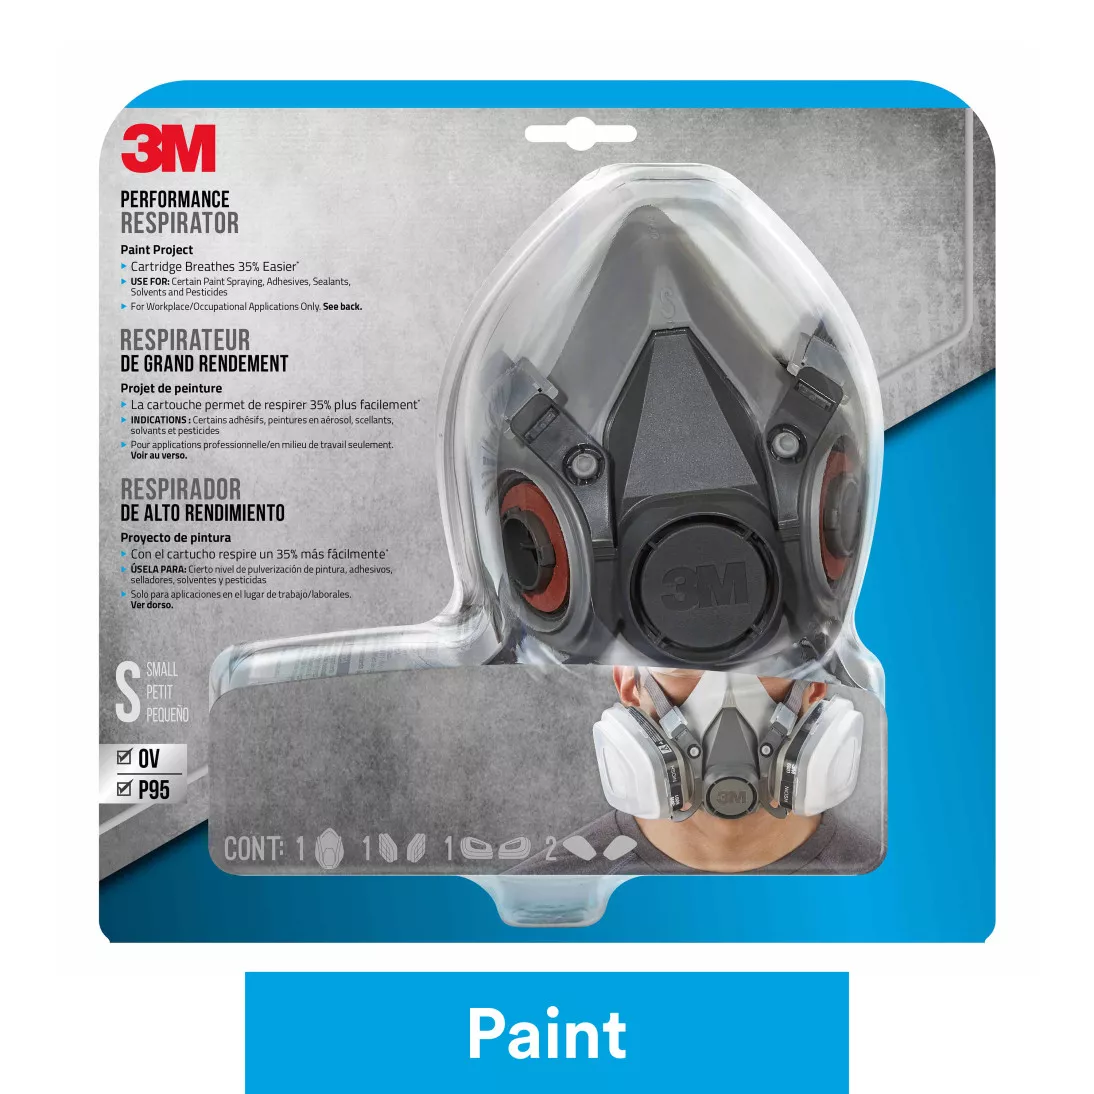 3M™ Performance Reusable Paint Project Respirator OV/P95, 6111P1-DC,
Size Small, 1 each/pack, 4 packs/case